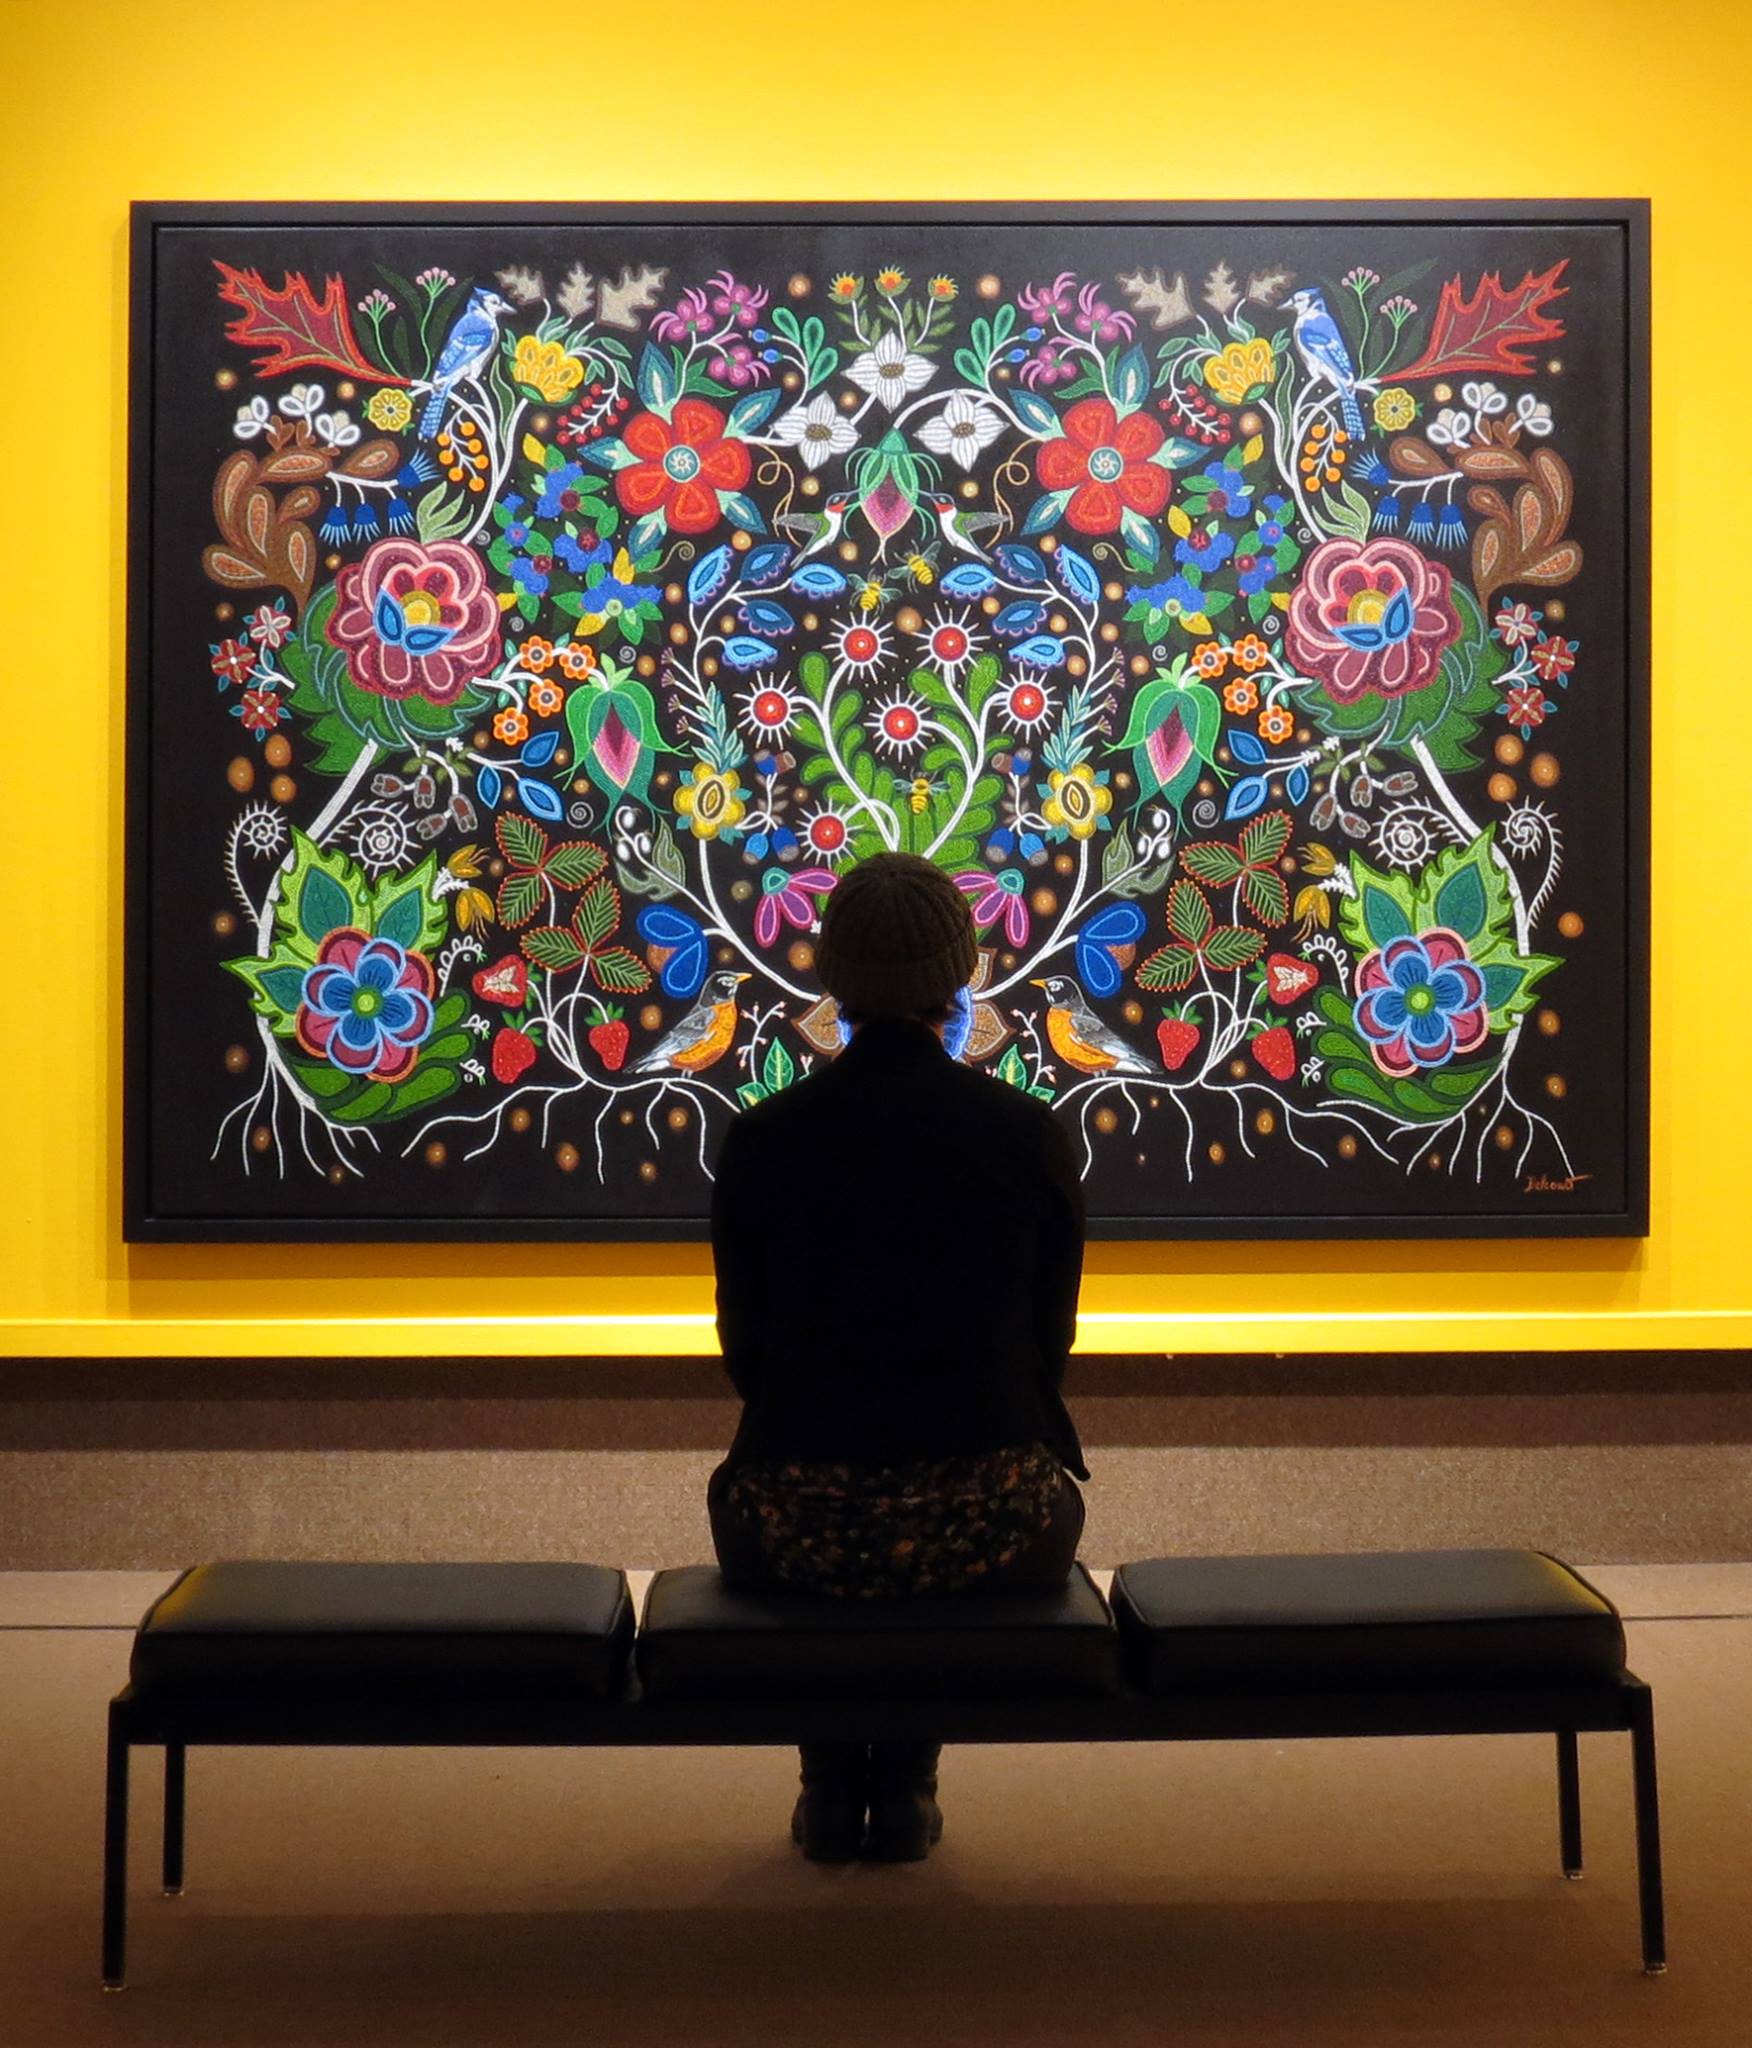 A silhouetted person sitting on a bench in front of a large painting of flowers on a black background, hung on a yellow gallery wall.